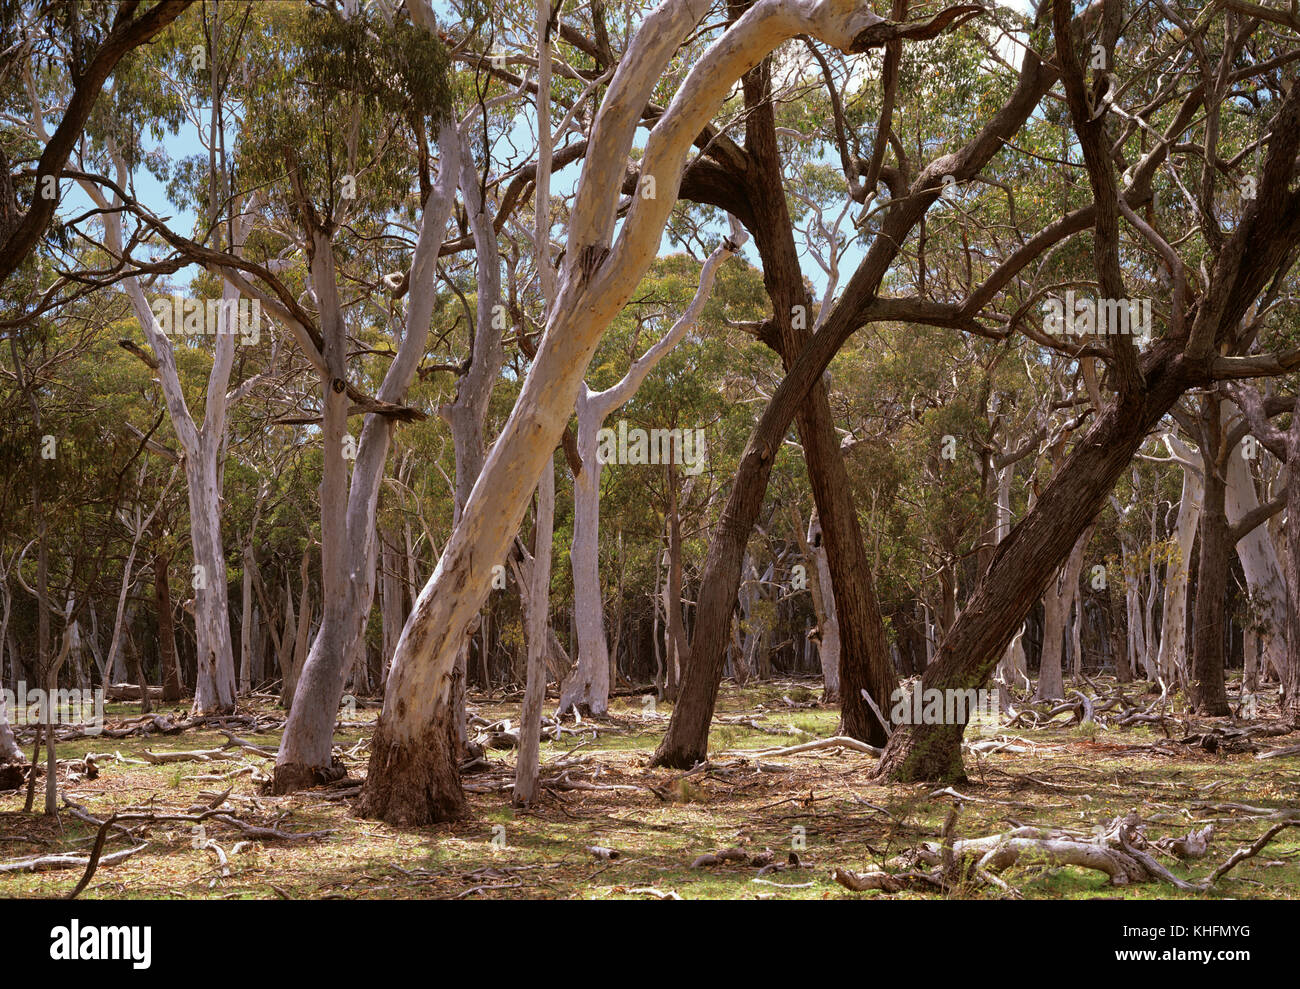 Snowgums (Eucalyptus pauciflora) and Silver top stringybark (Eucalyptus laevopinea), with dark trunks, in open forest, with grassy understorey. Coolah Stock Photo